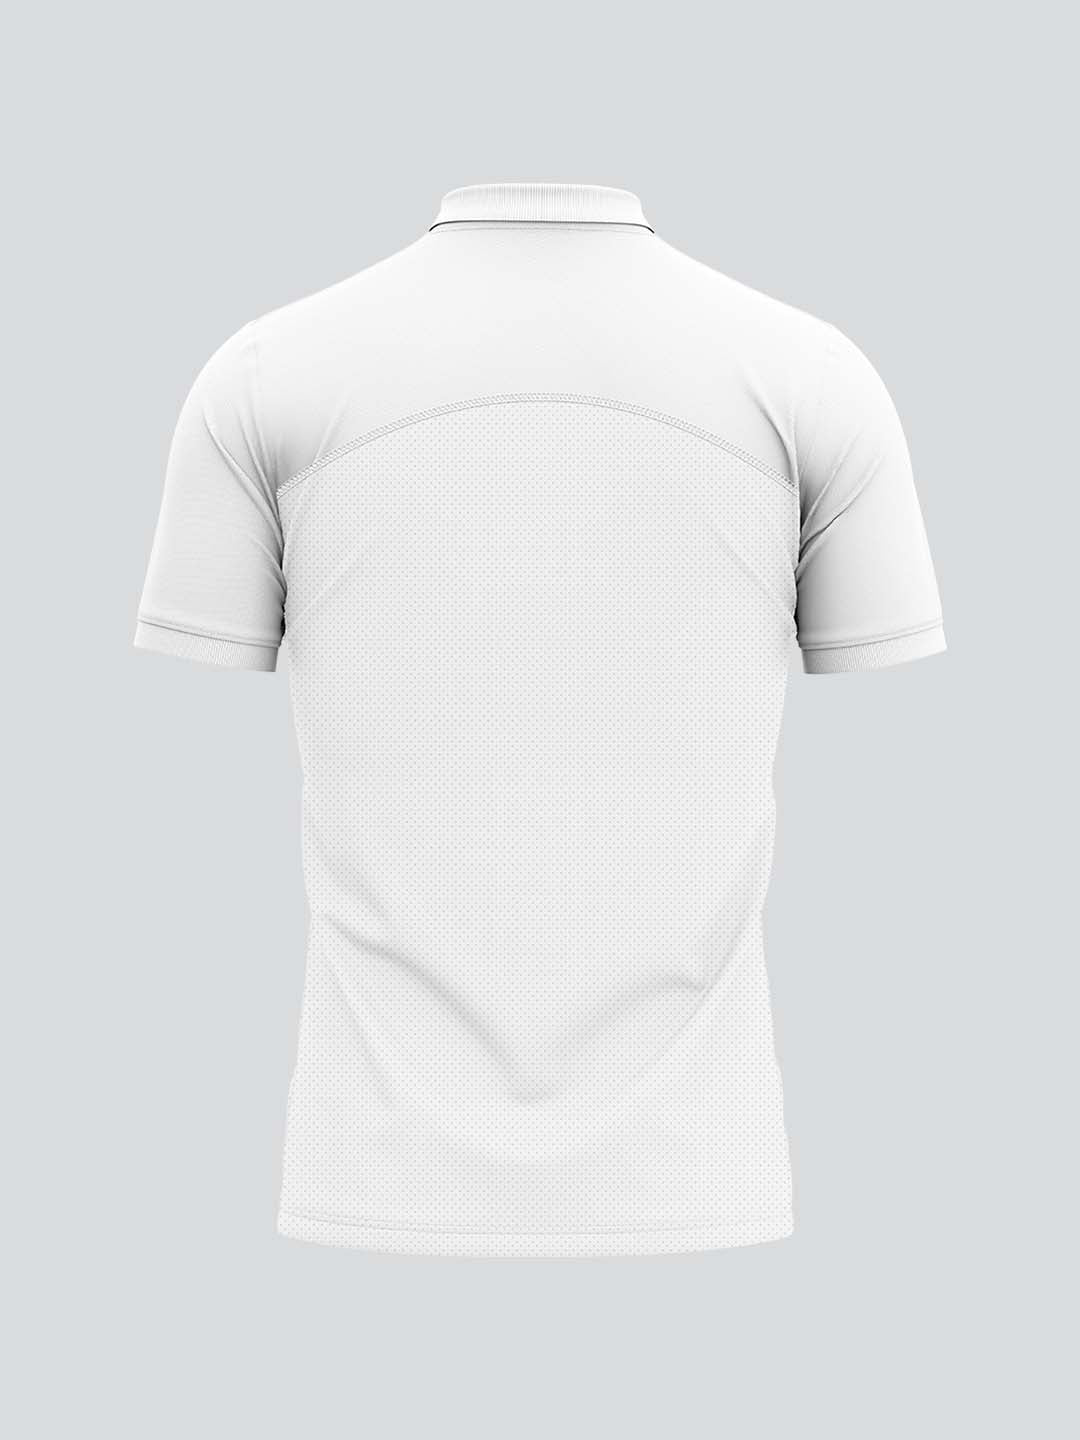 Men Cricket Whites 2-Way Stretch Solid Ribbed Collar Polo Jersey-A1008WH